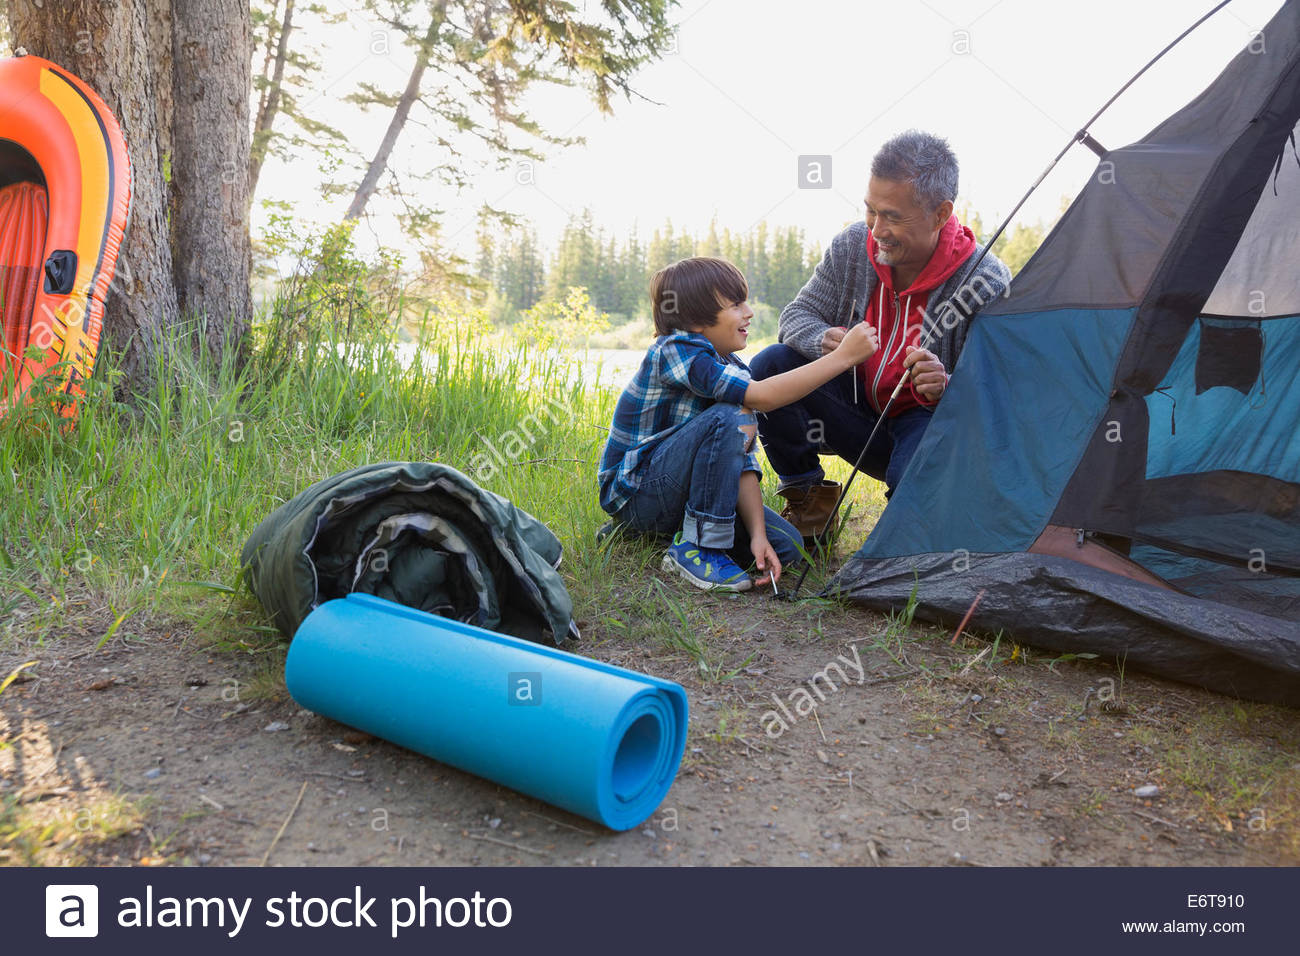 Father and son pitching tent at campsite Stock Photo